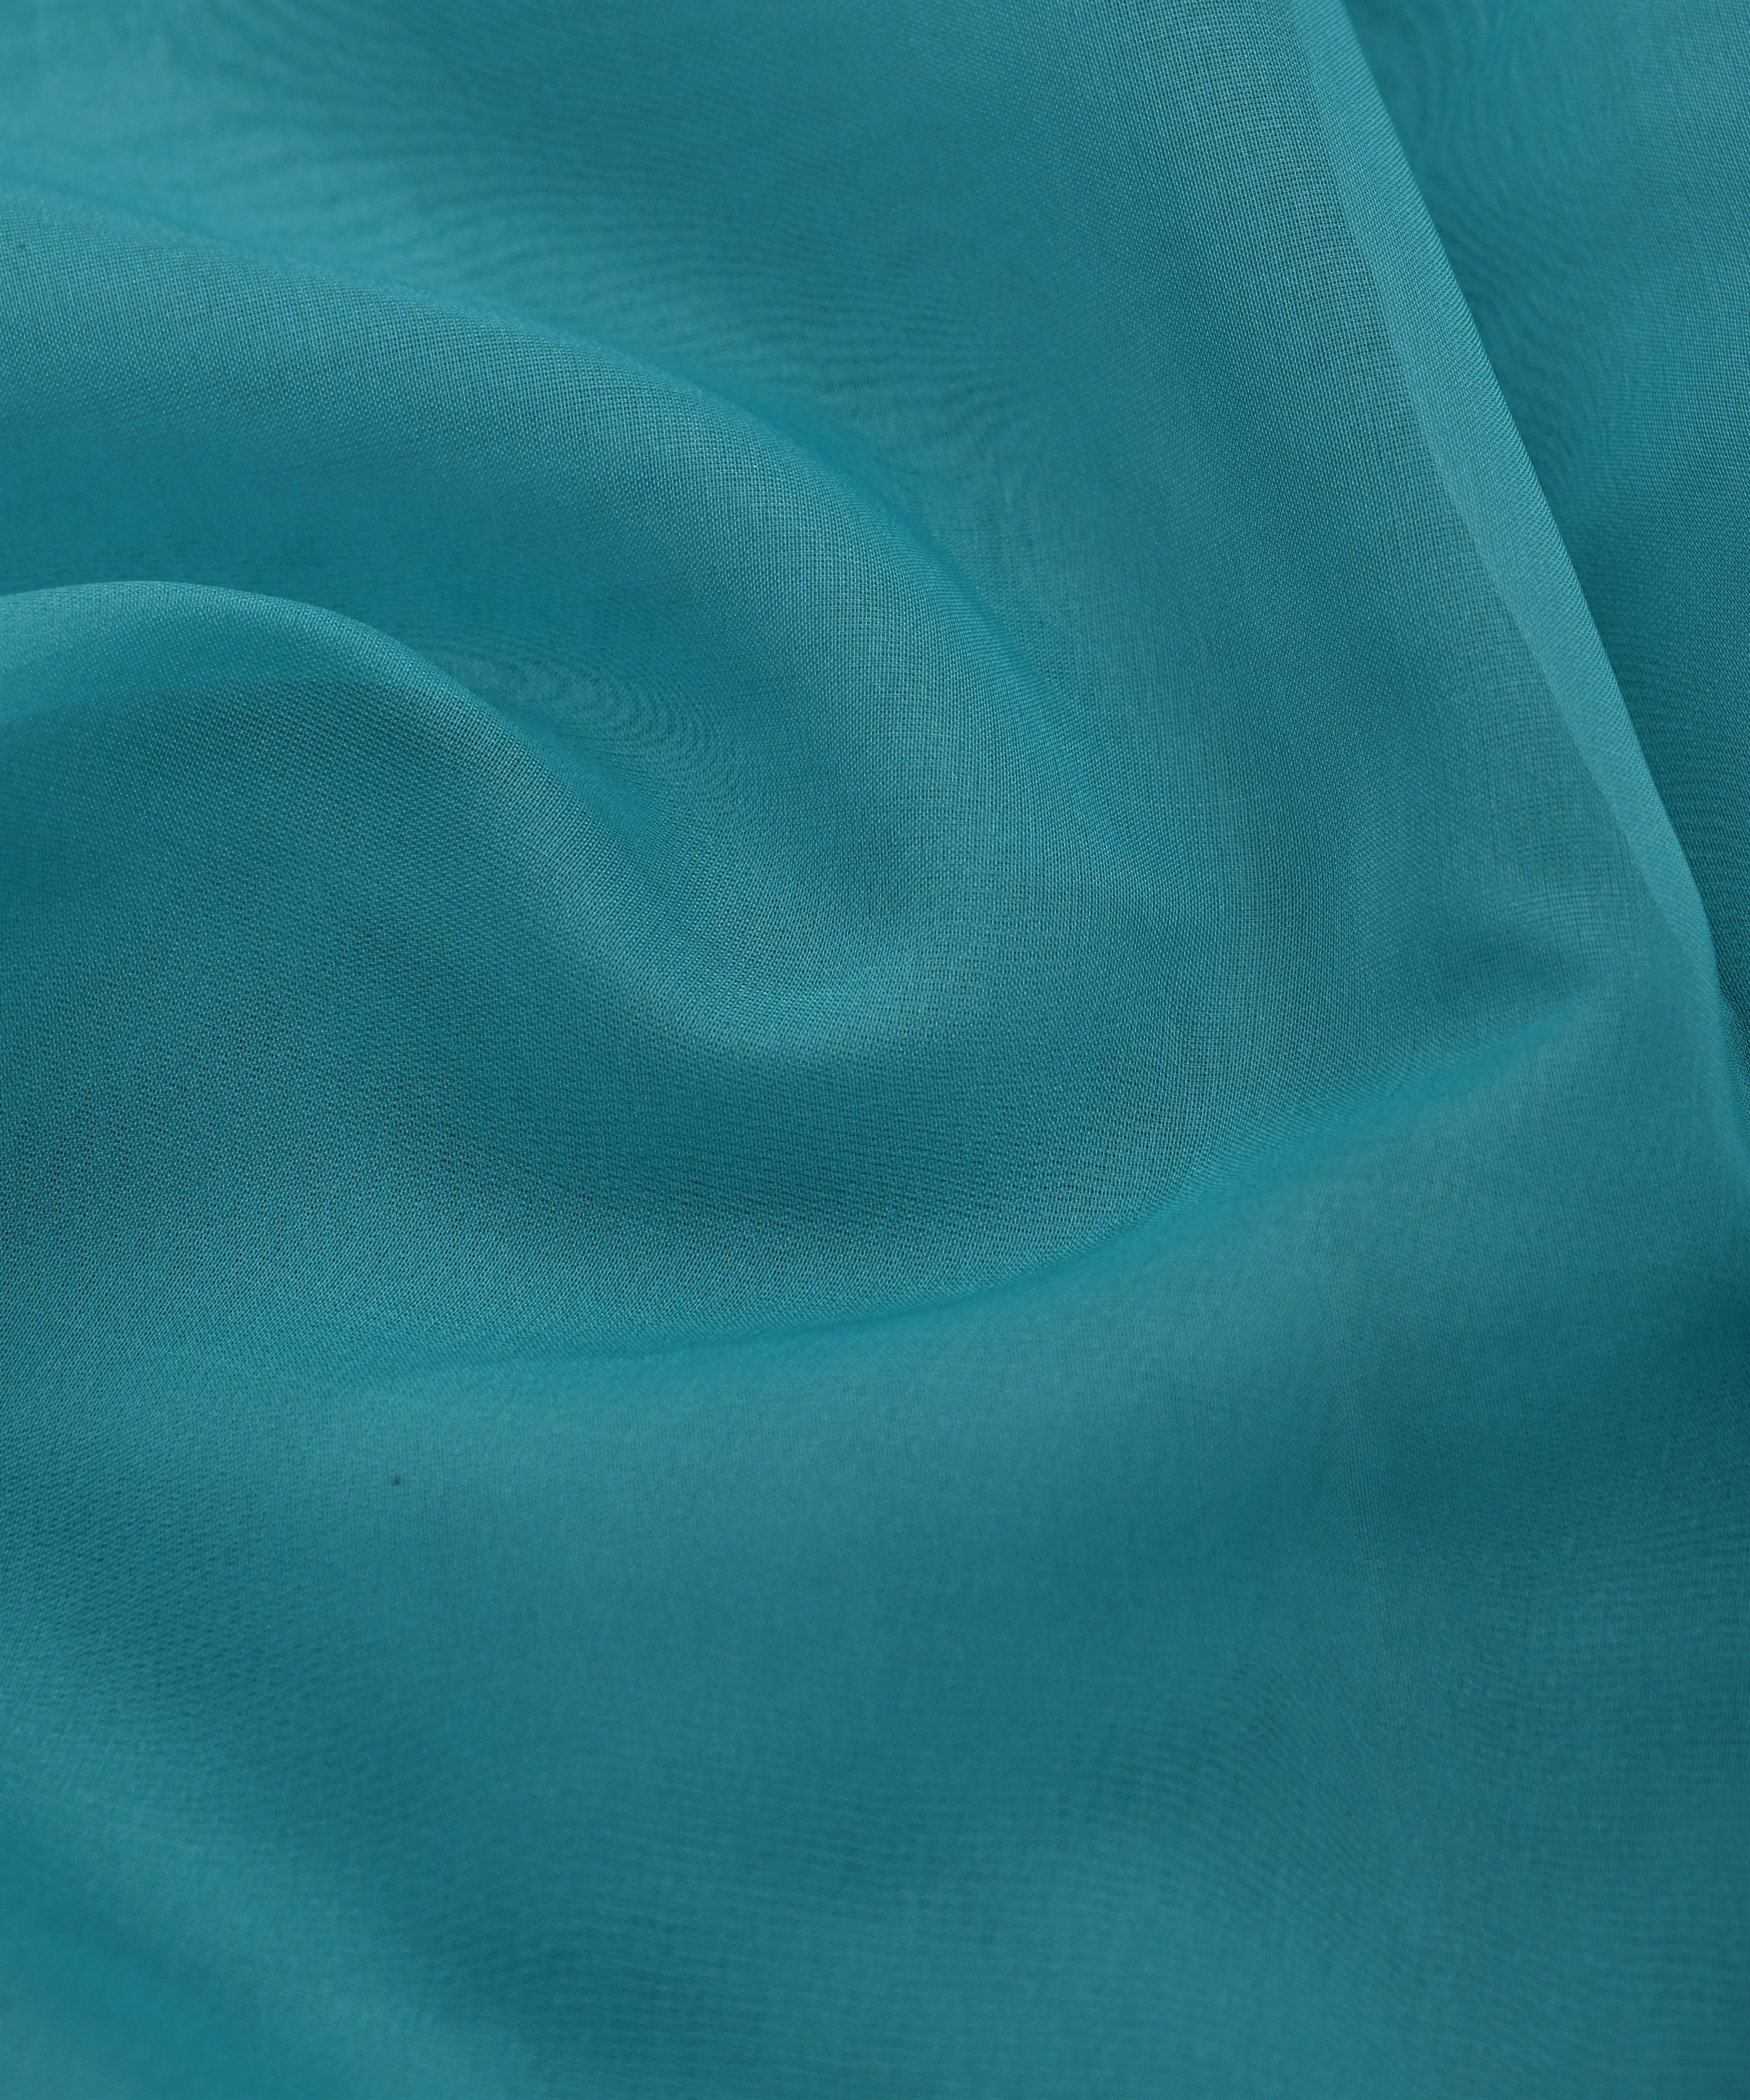 Pacific Blue Plain Dyed Organza Fabric